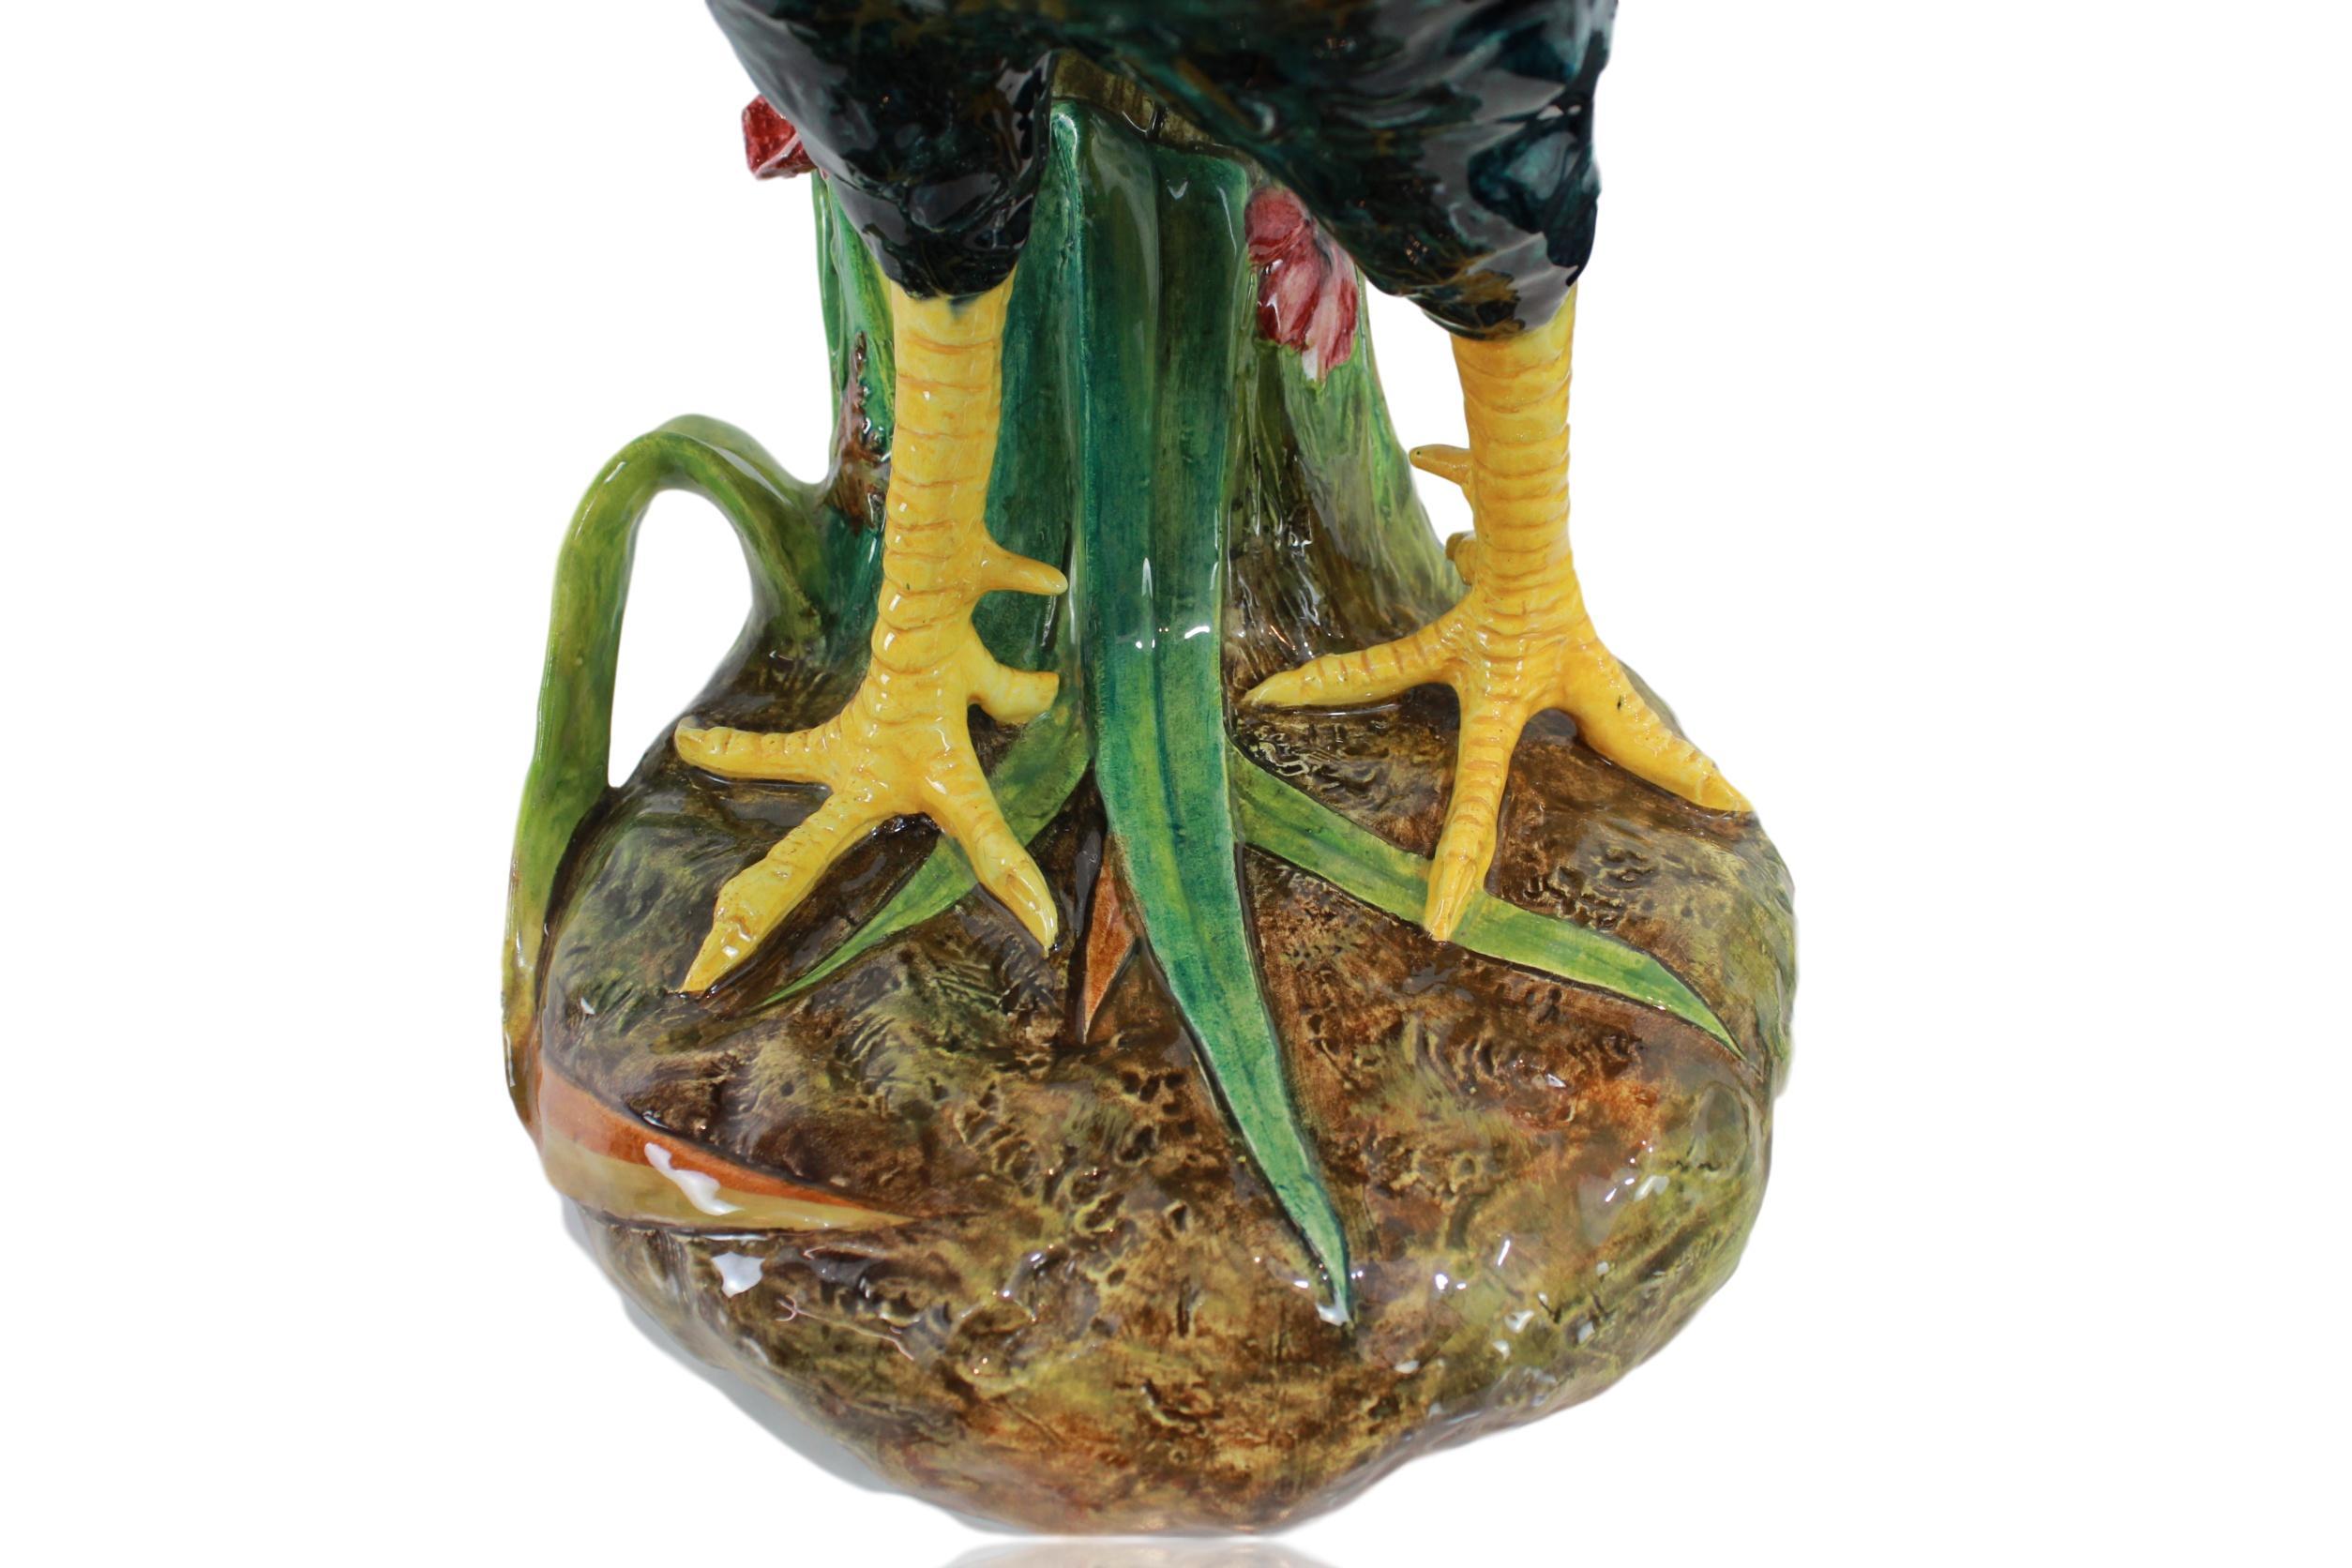 Molded Very Large Majolica Rooster Vase by Delphin Massier, French, circa 1880